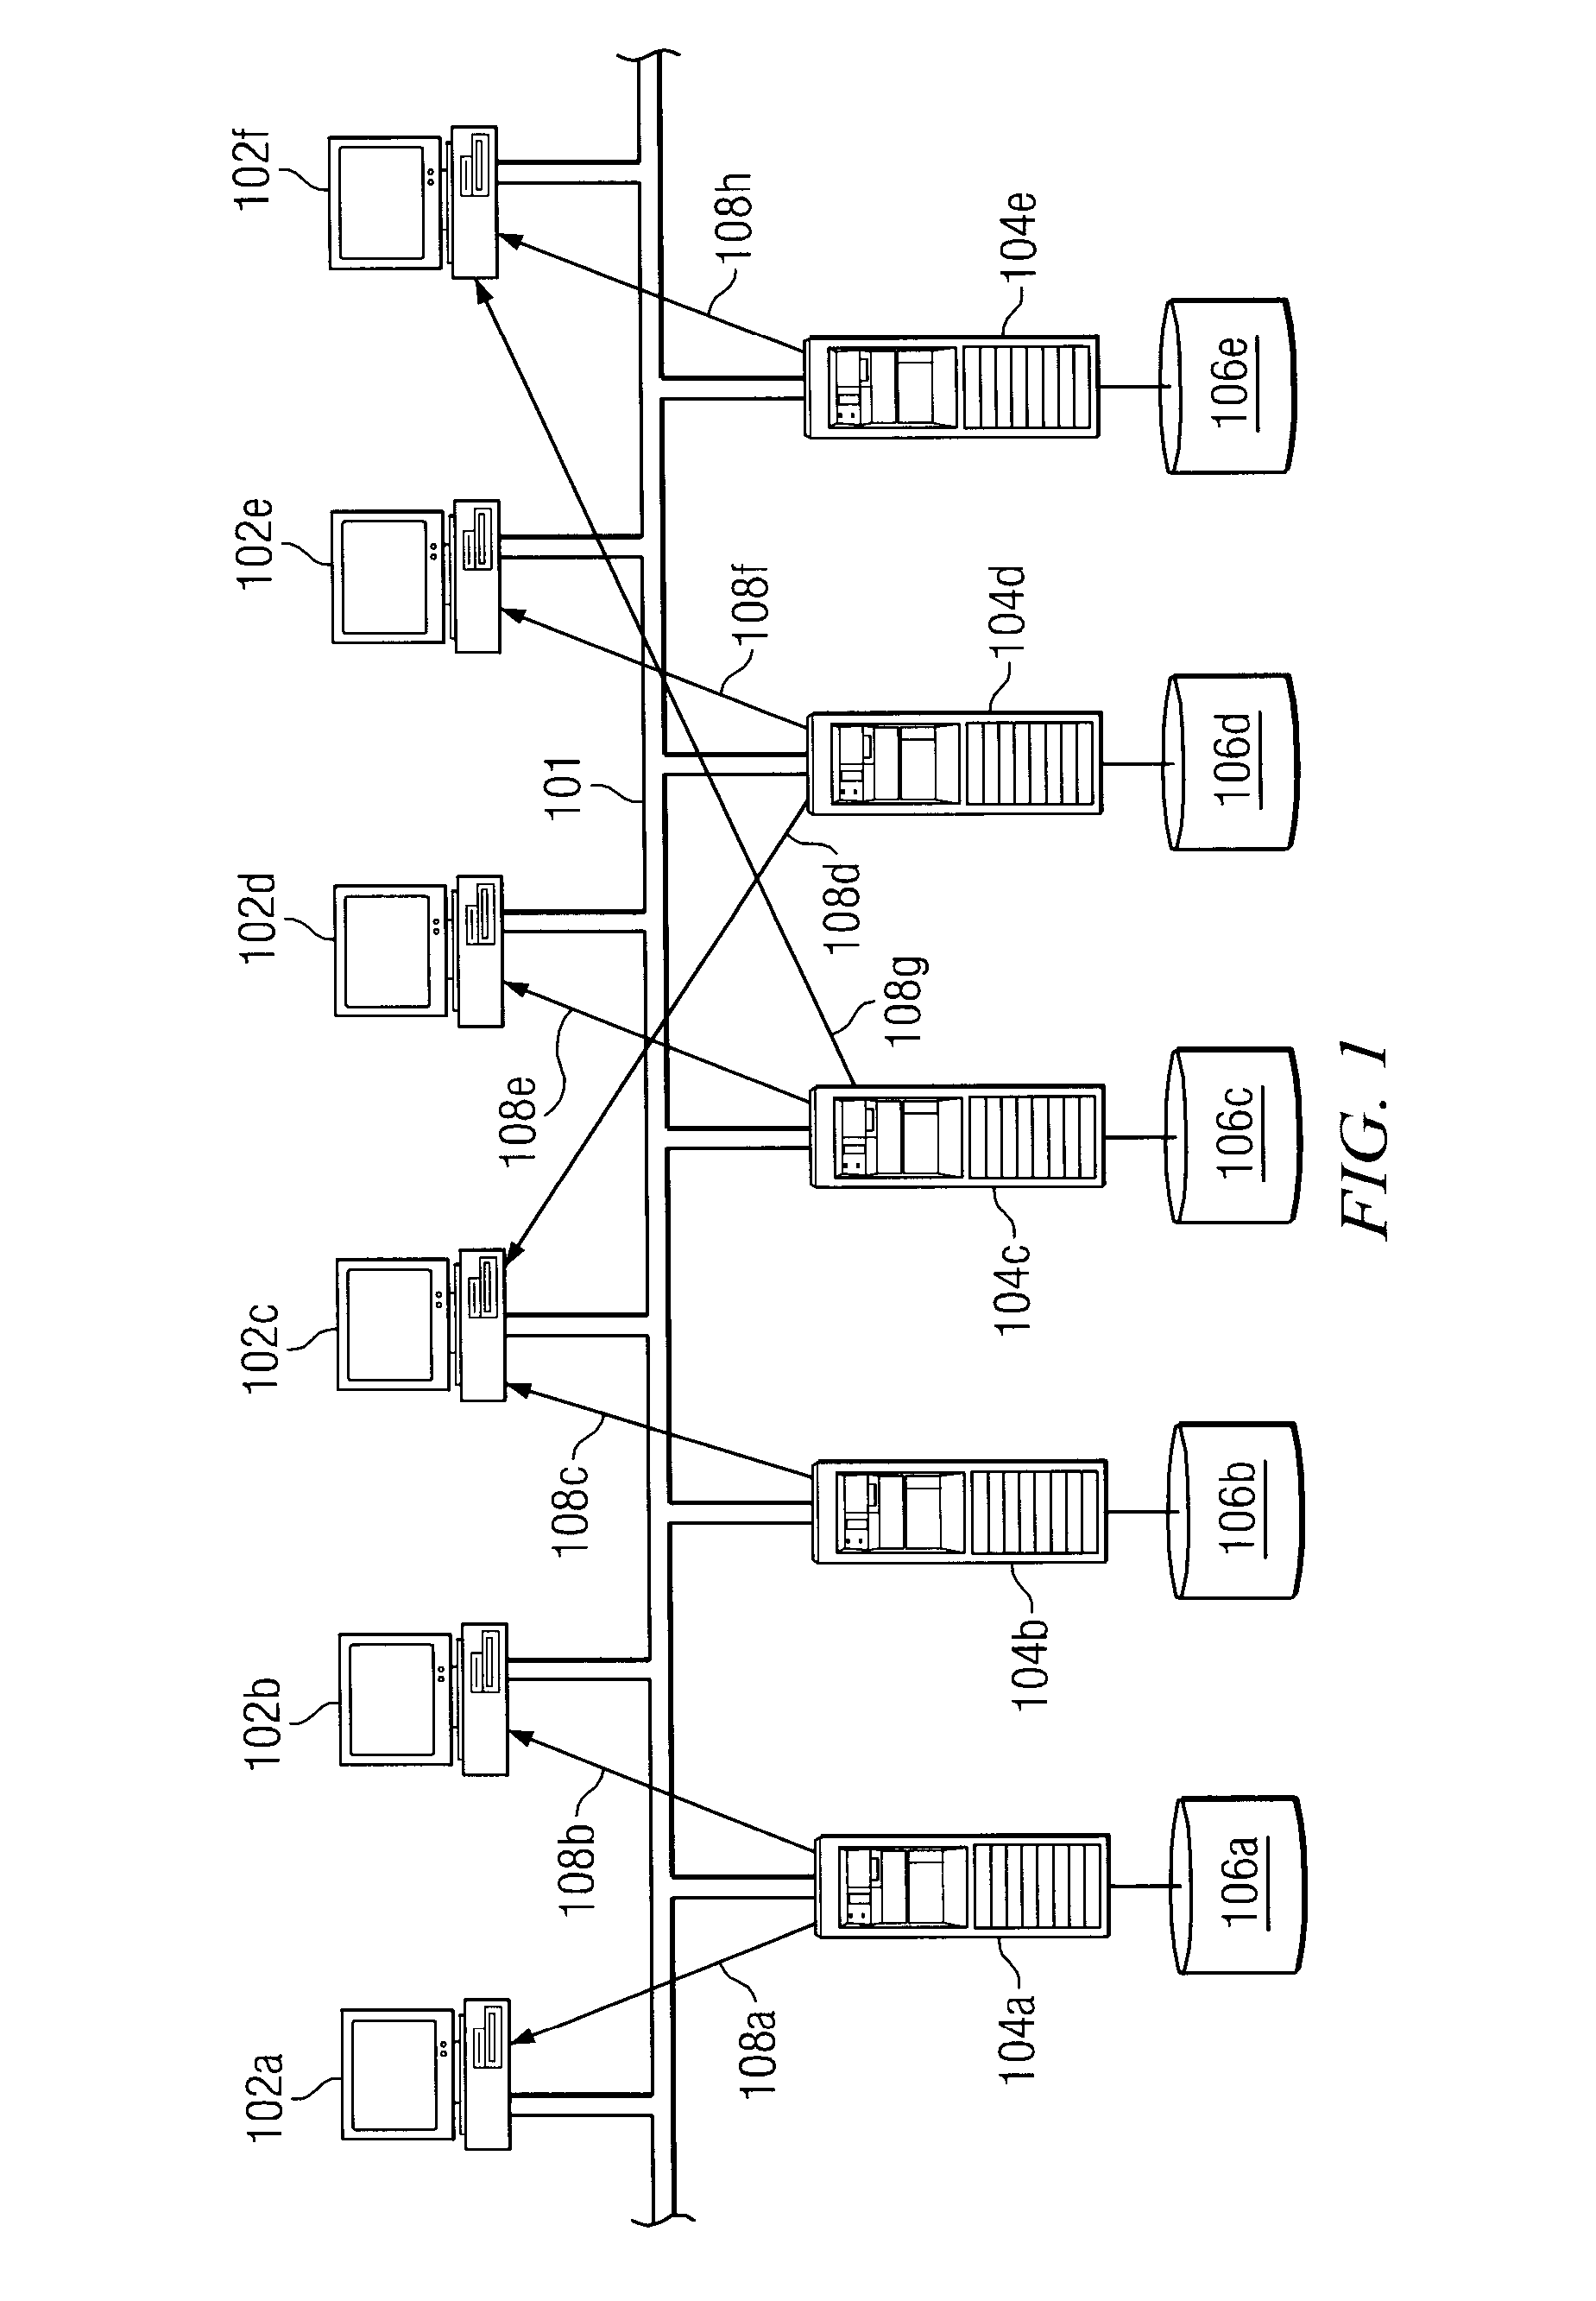 Method and apparatus for managing file systems and file-based data storage